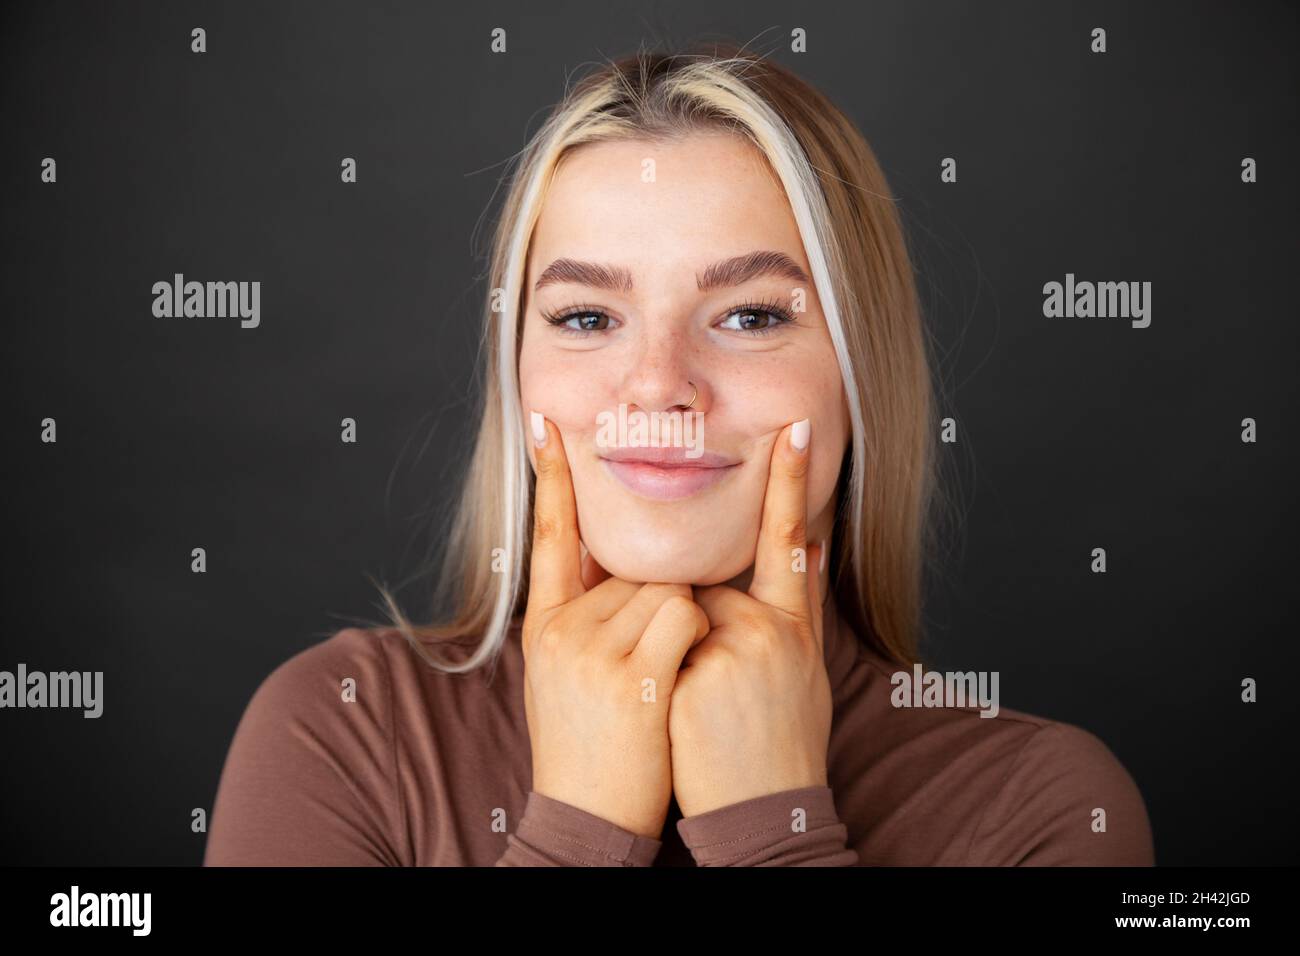 Portrait of a young woman pushing her fingers into her cheeks making her smile Stock Photo